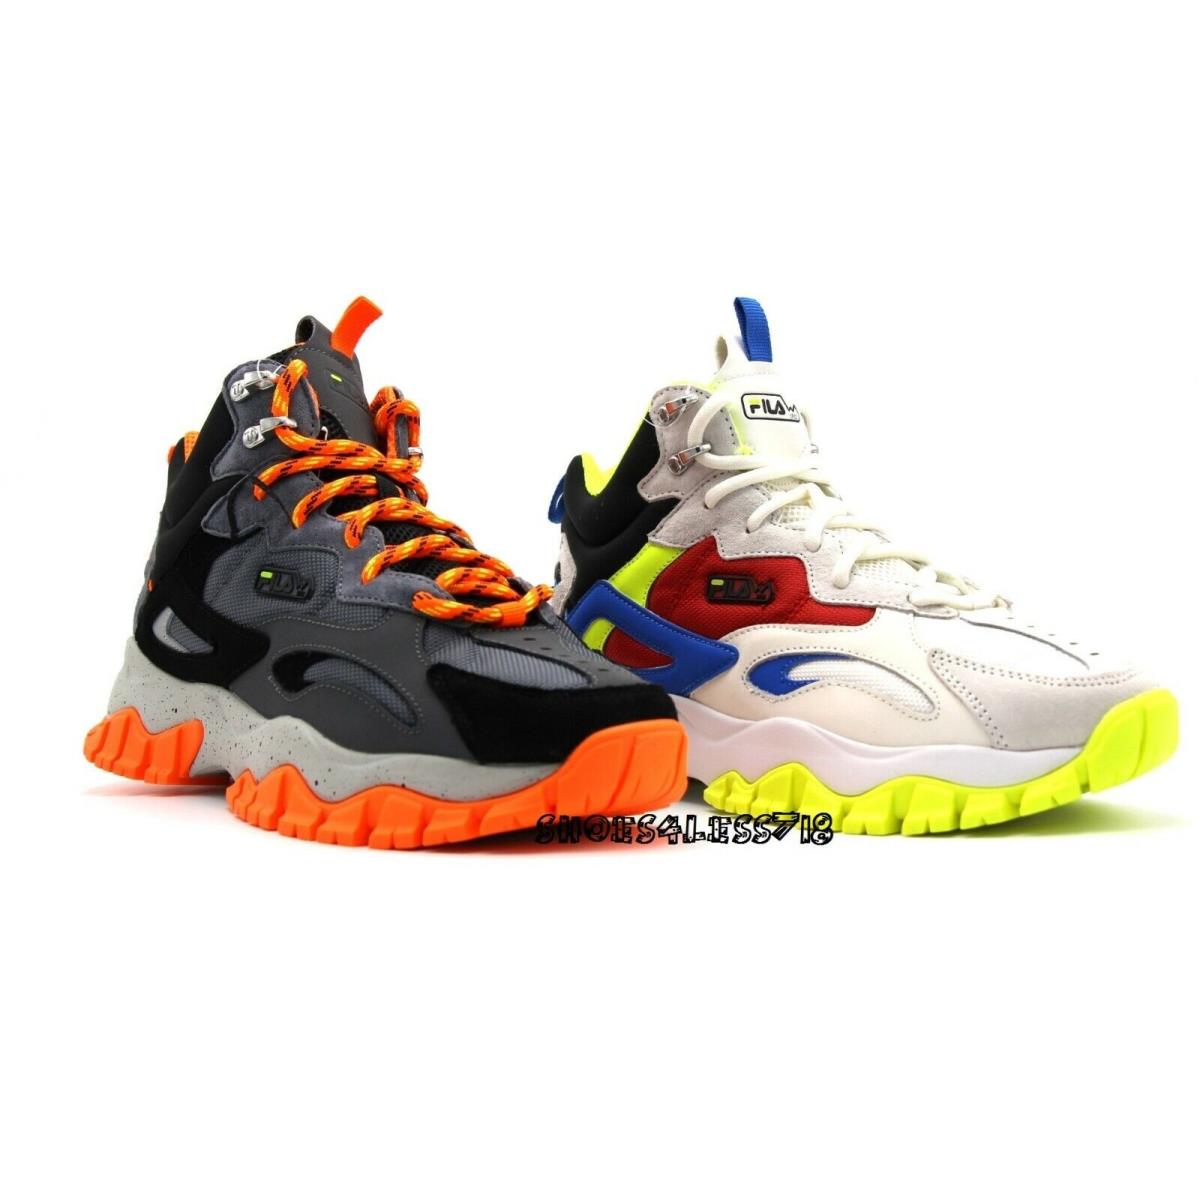 Men Fila Ray Tracer TR 2 Mid Limited Edition Orange or Green HI Top Sneakers - Black/Orange or White/Green